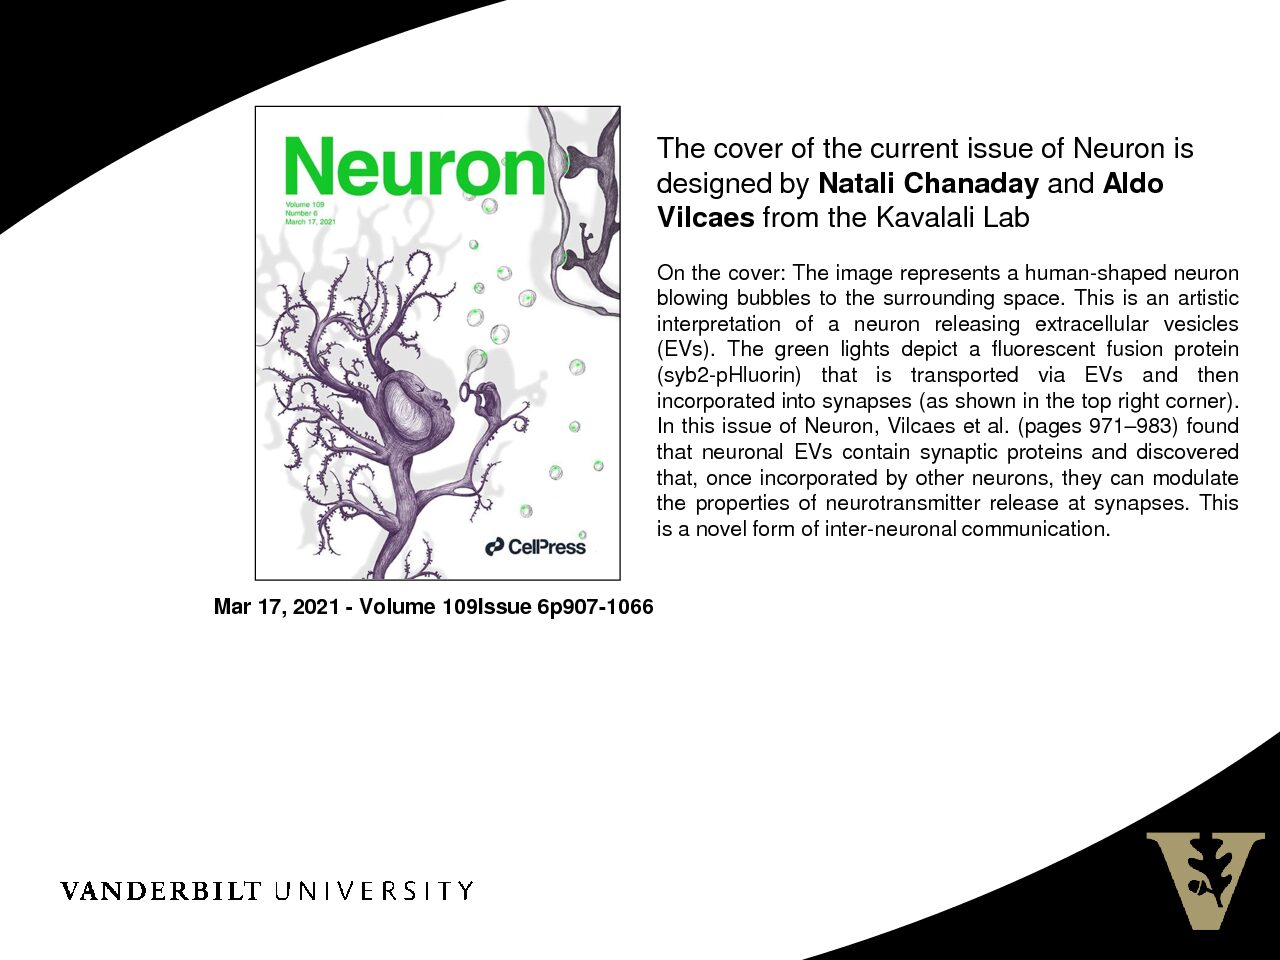 Cover of Neuron Designed by Natali Chanaday and Aldo Vilcaes from Kavalali Lab